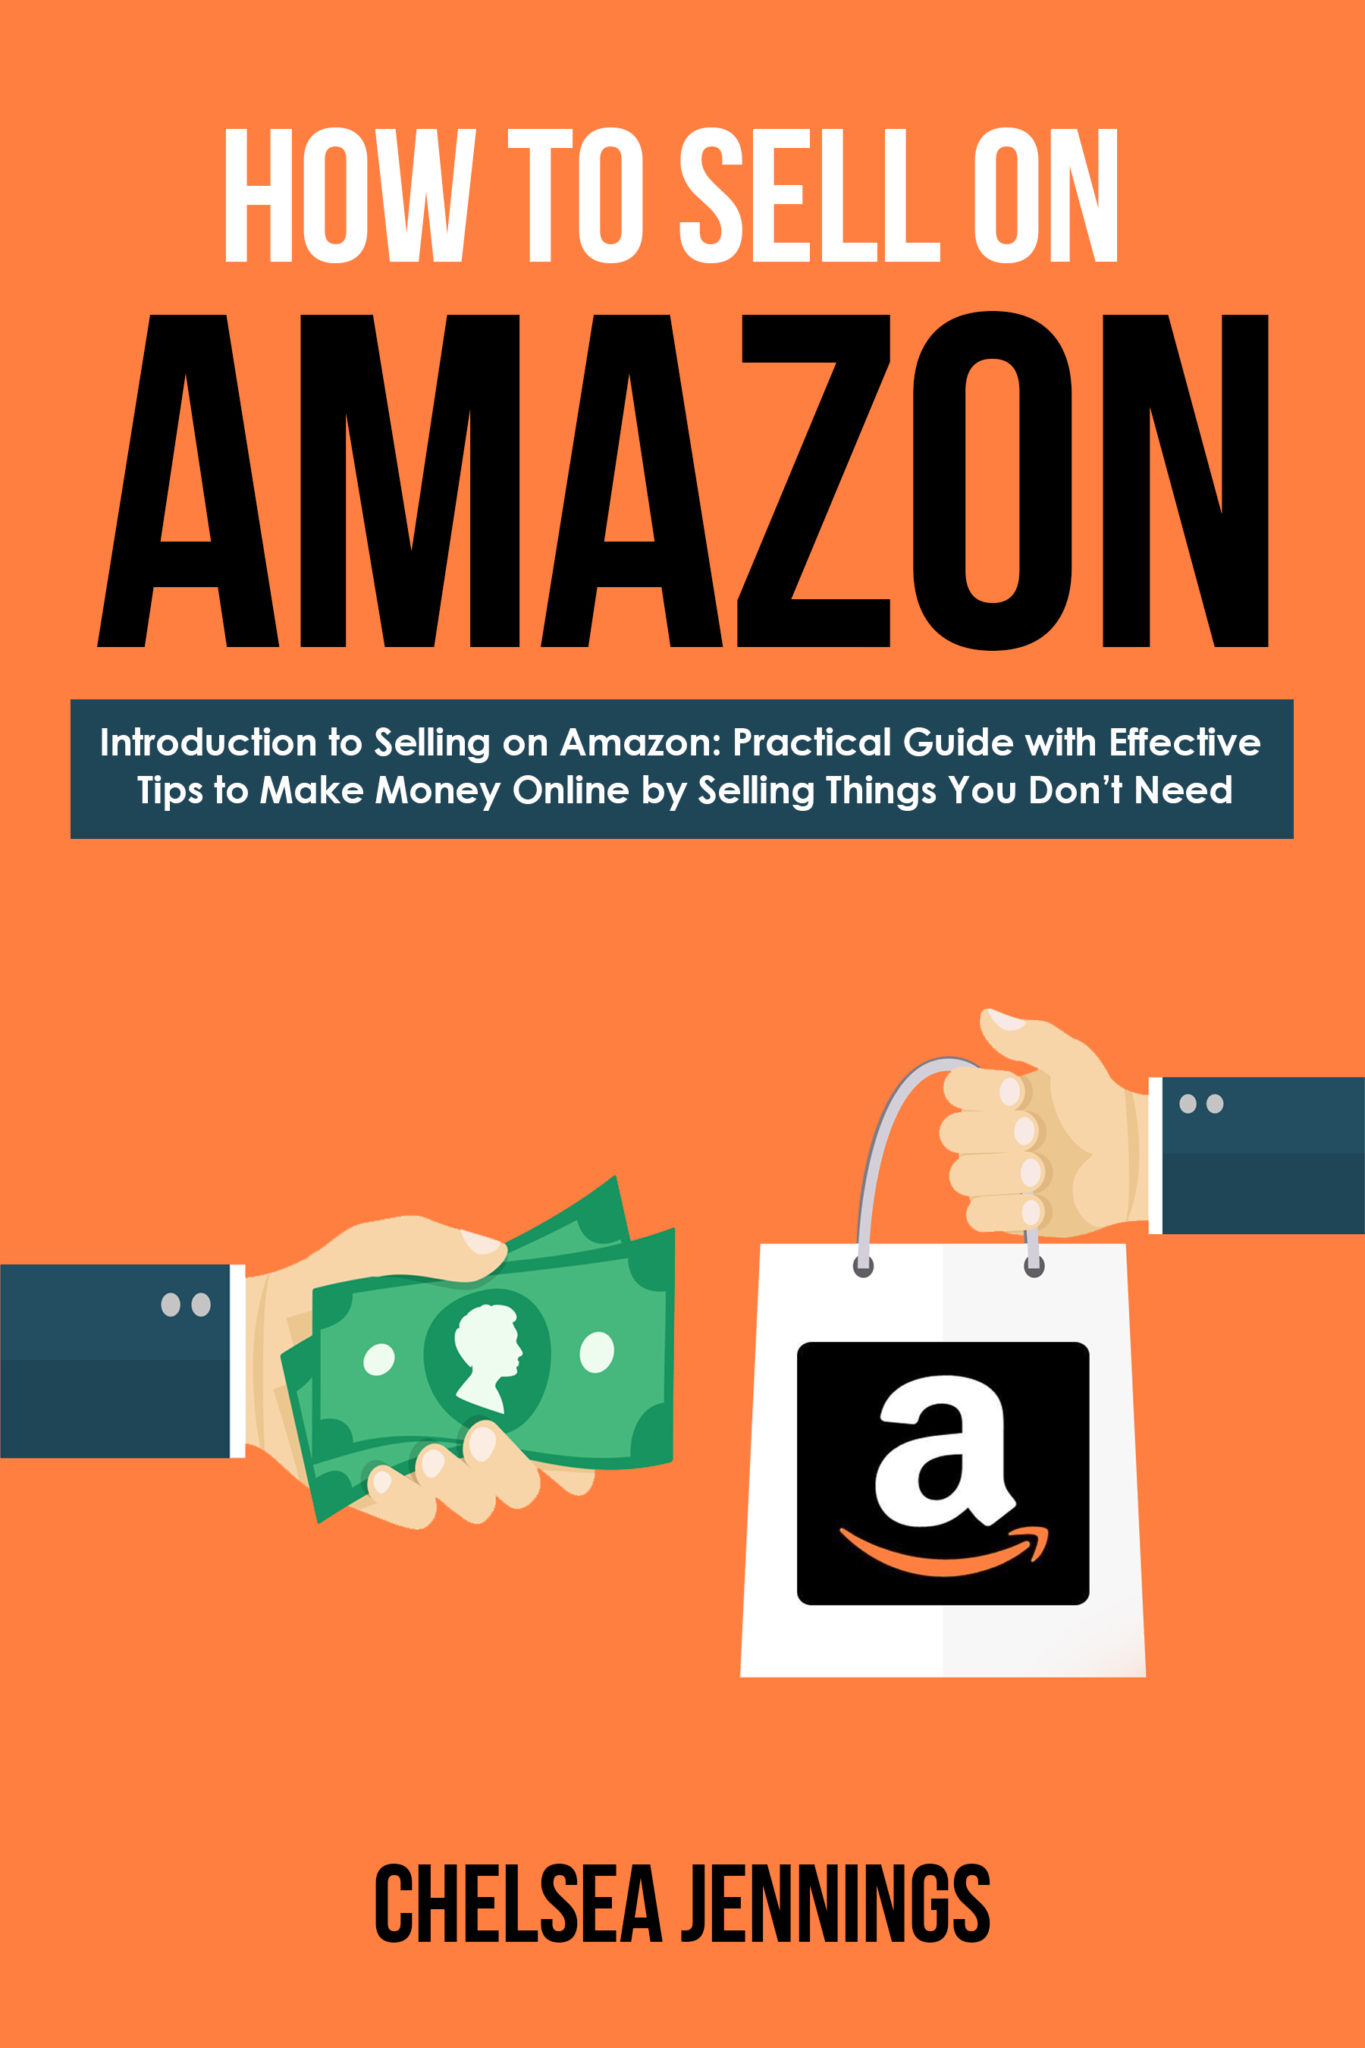 FREE: How to Sell on Amazon by Chelsea Jennings